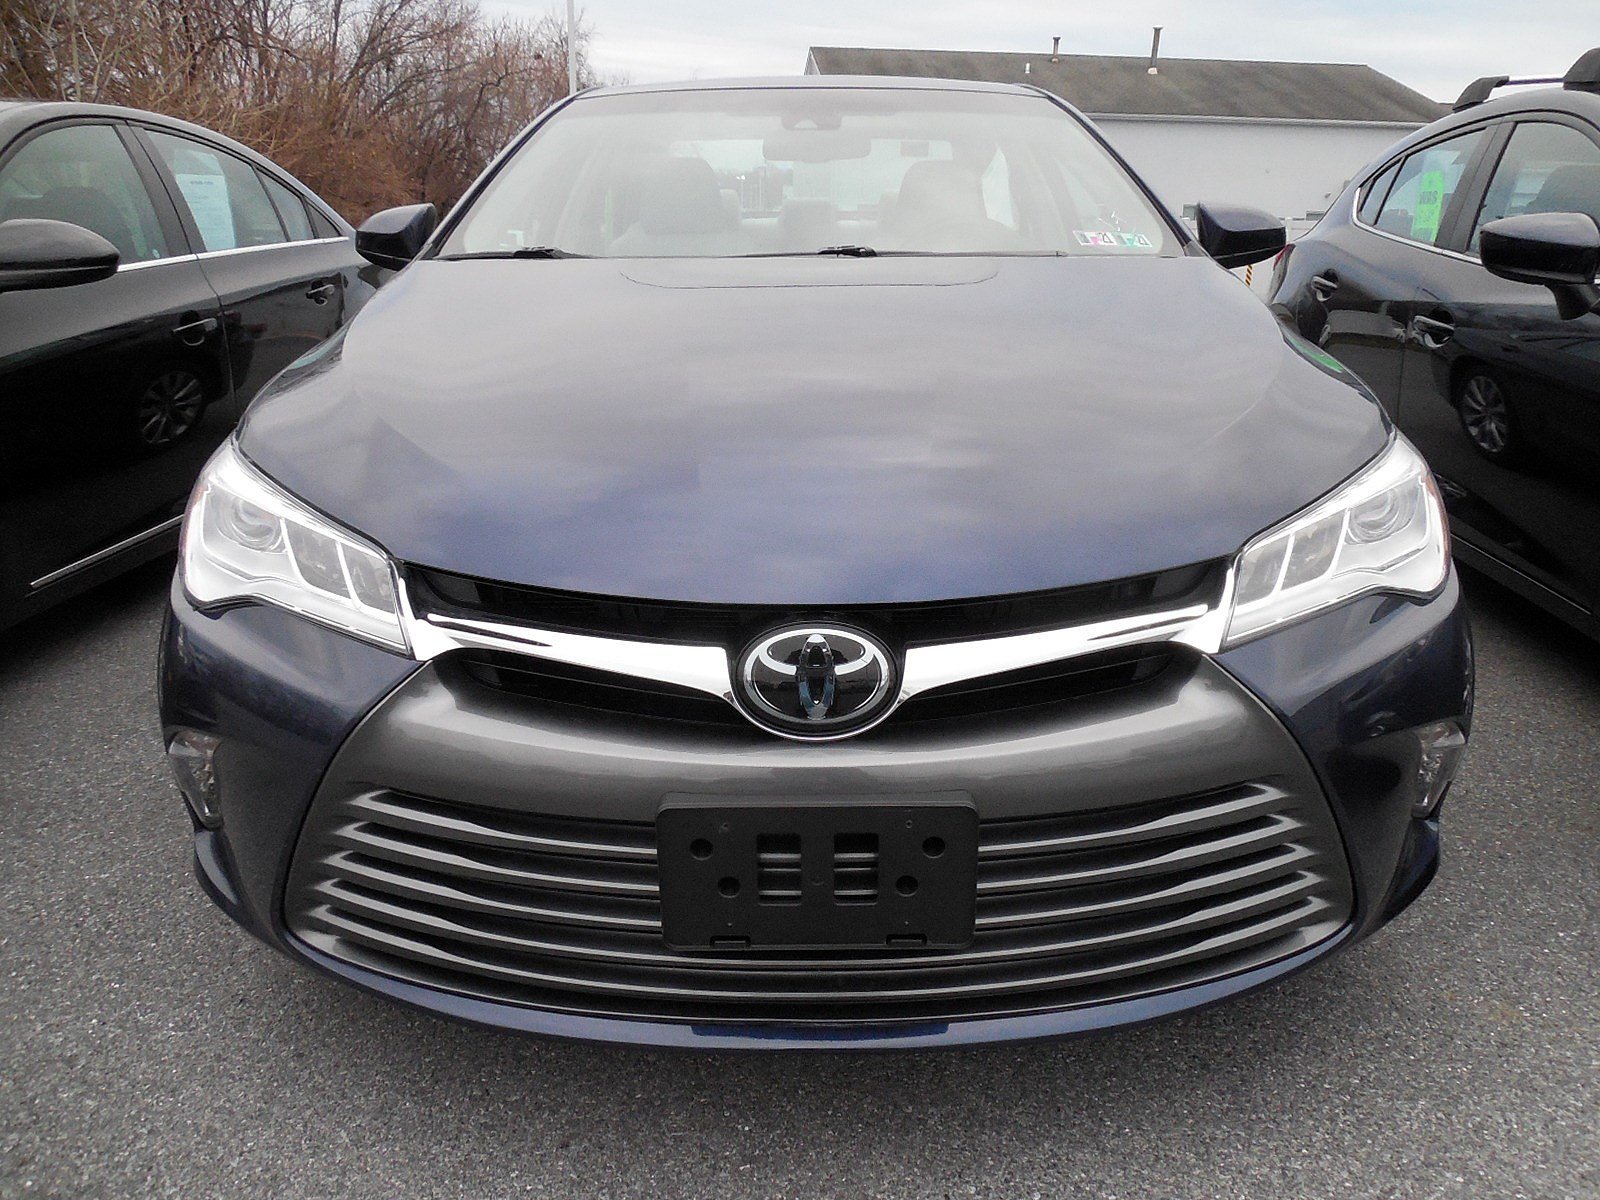 Pre-Owned 2017 Toyota Camry XLE V6 4dr Car in East Petersburg #L0098